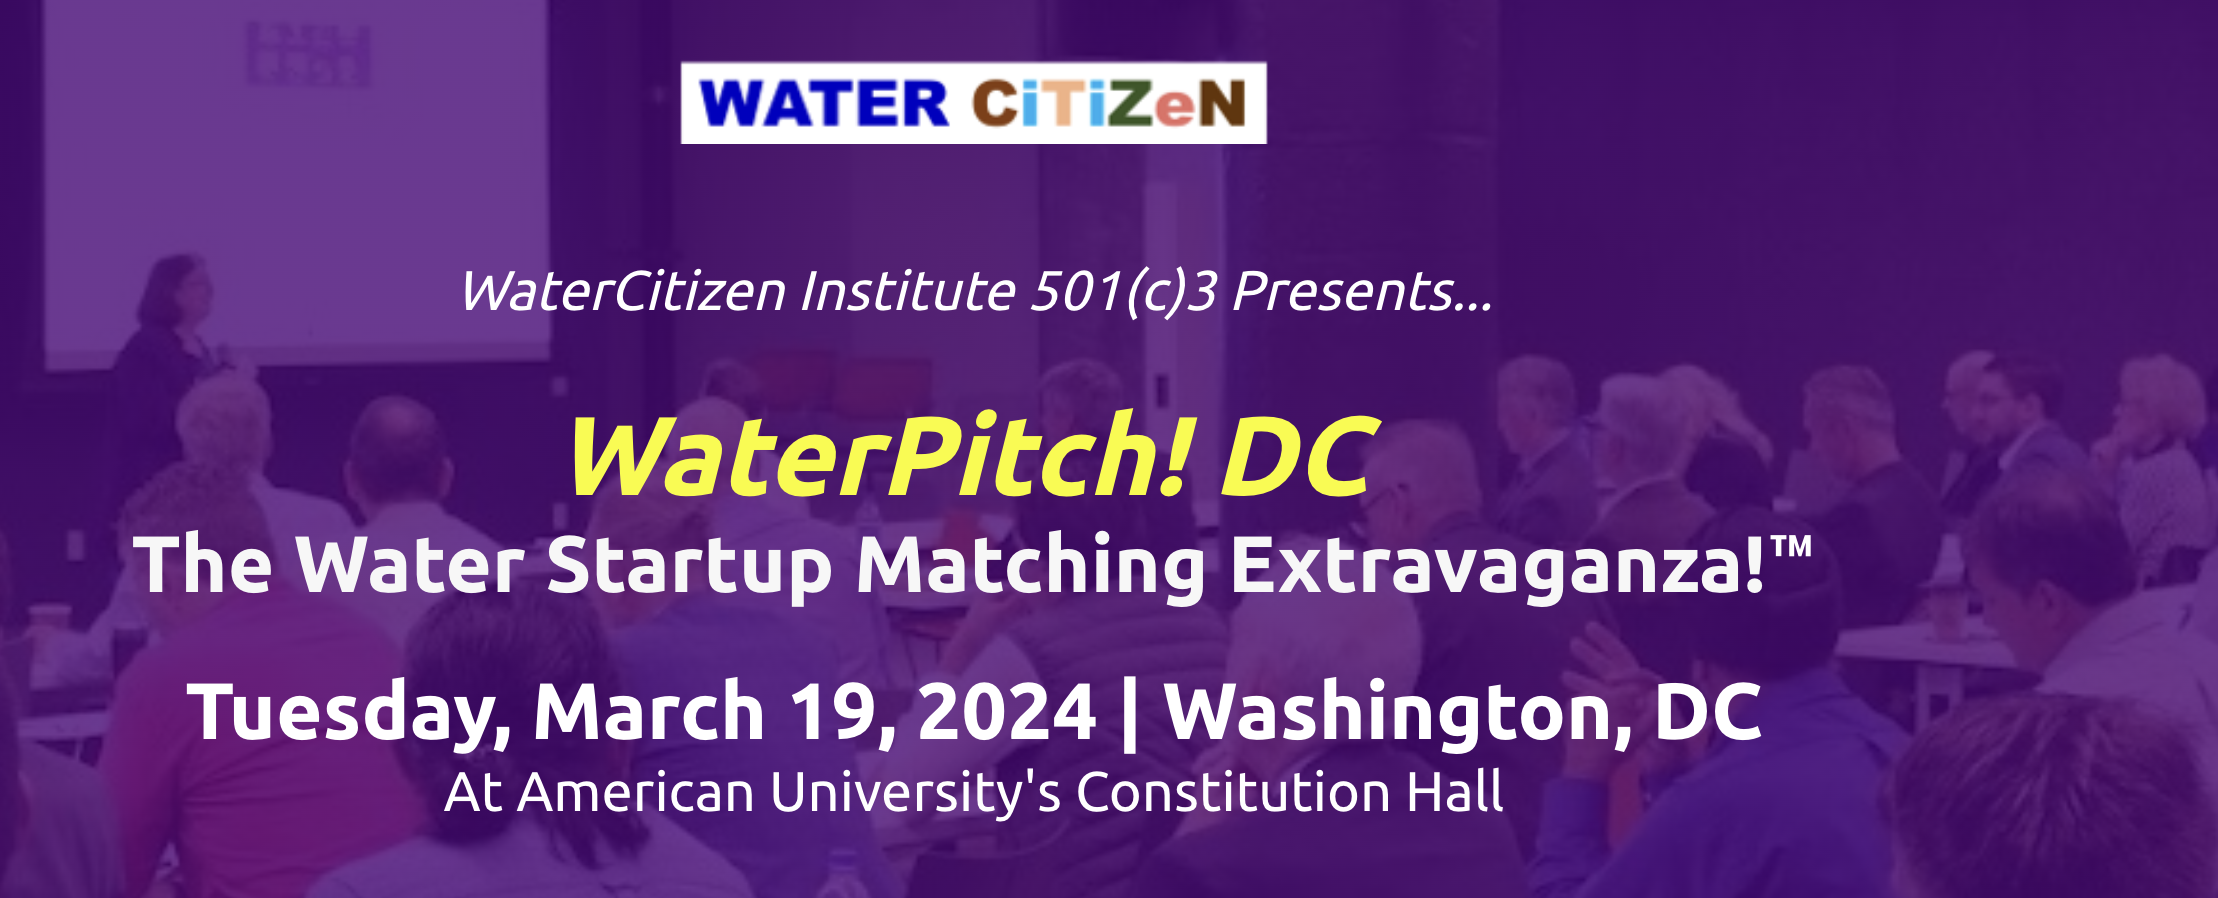 Water Startup Matching Extravaganza!Mark Your Calendars: March 19, 2024Following our successful production of the Water Startup Matching Extrava...